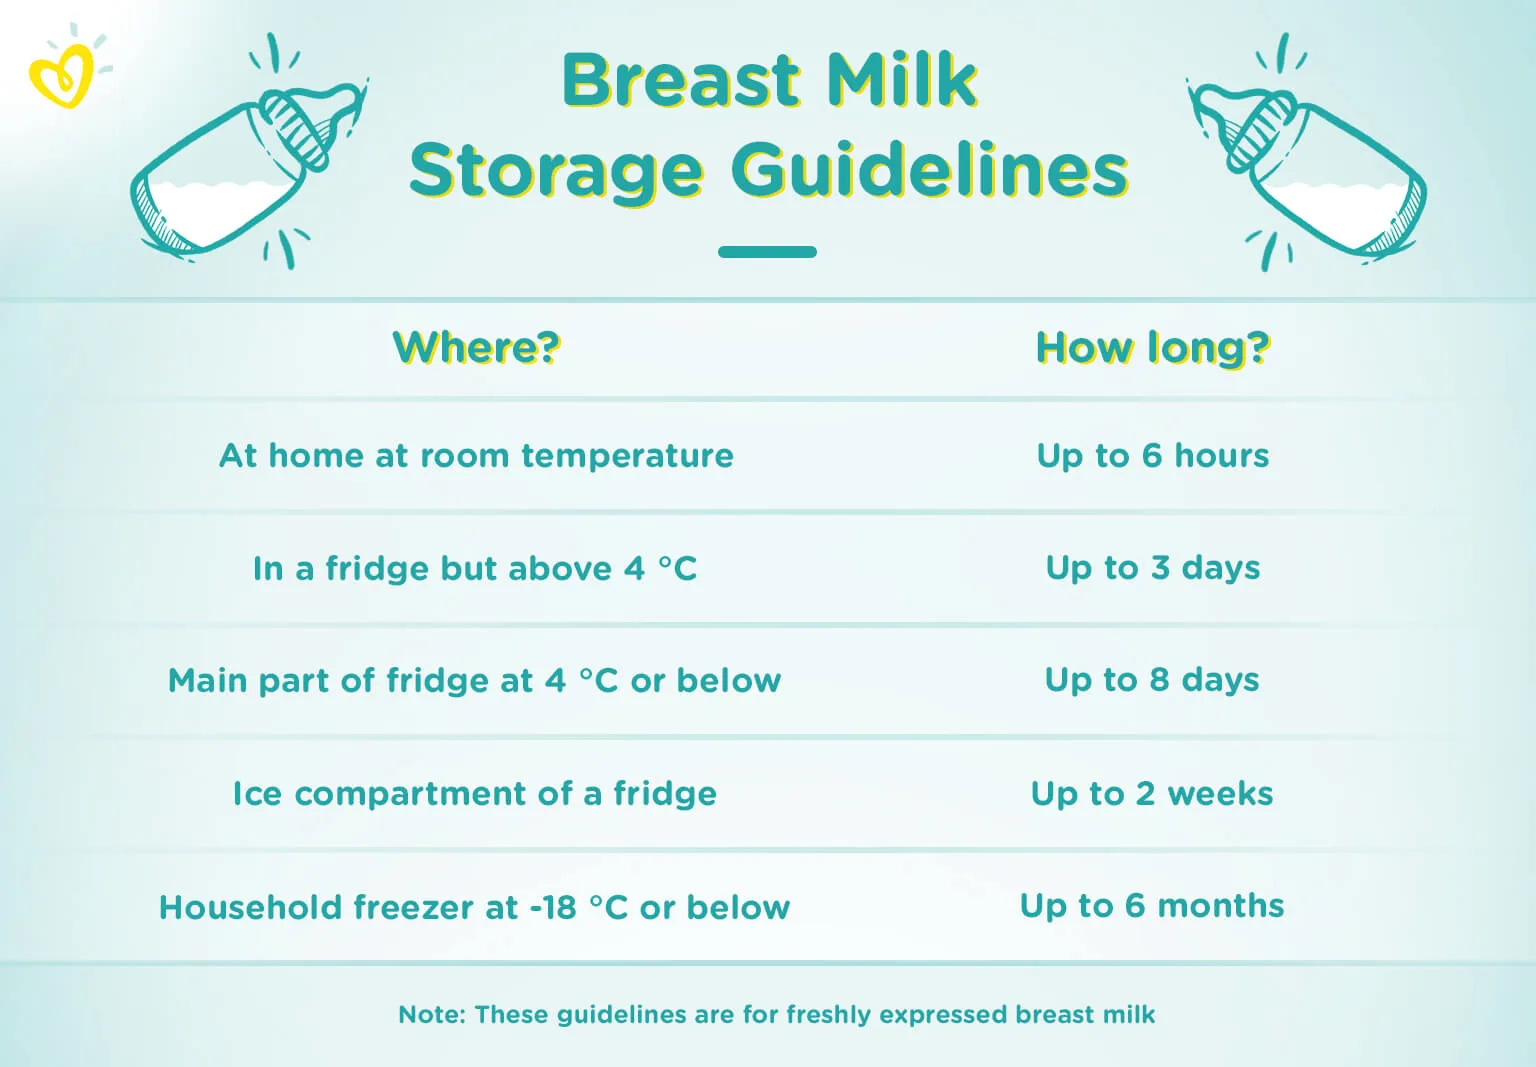 Flying with breast milk: Storage tips, rules, and more